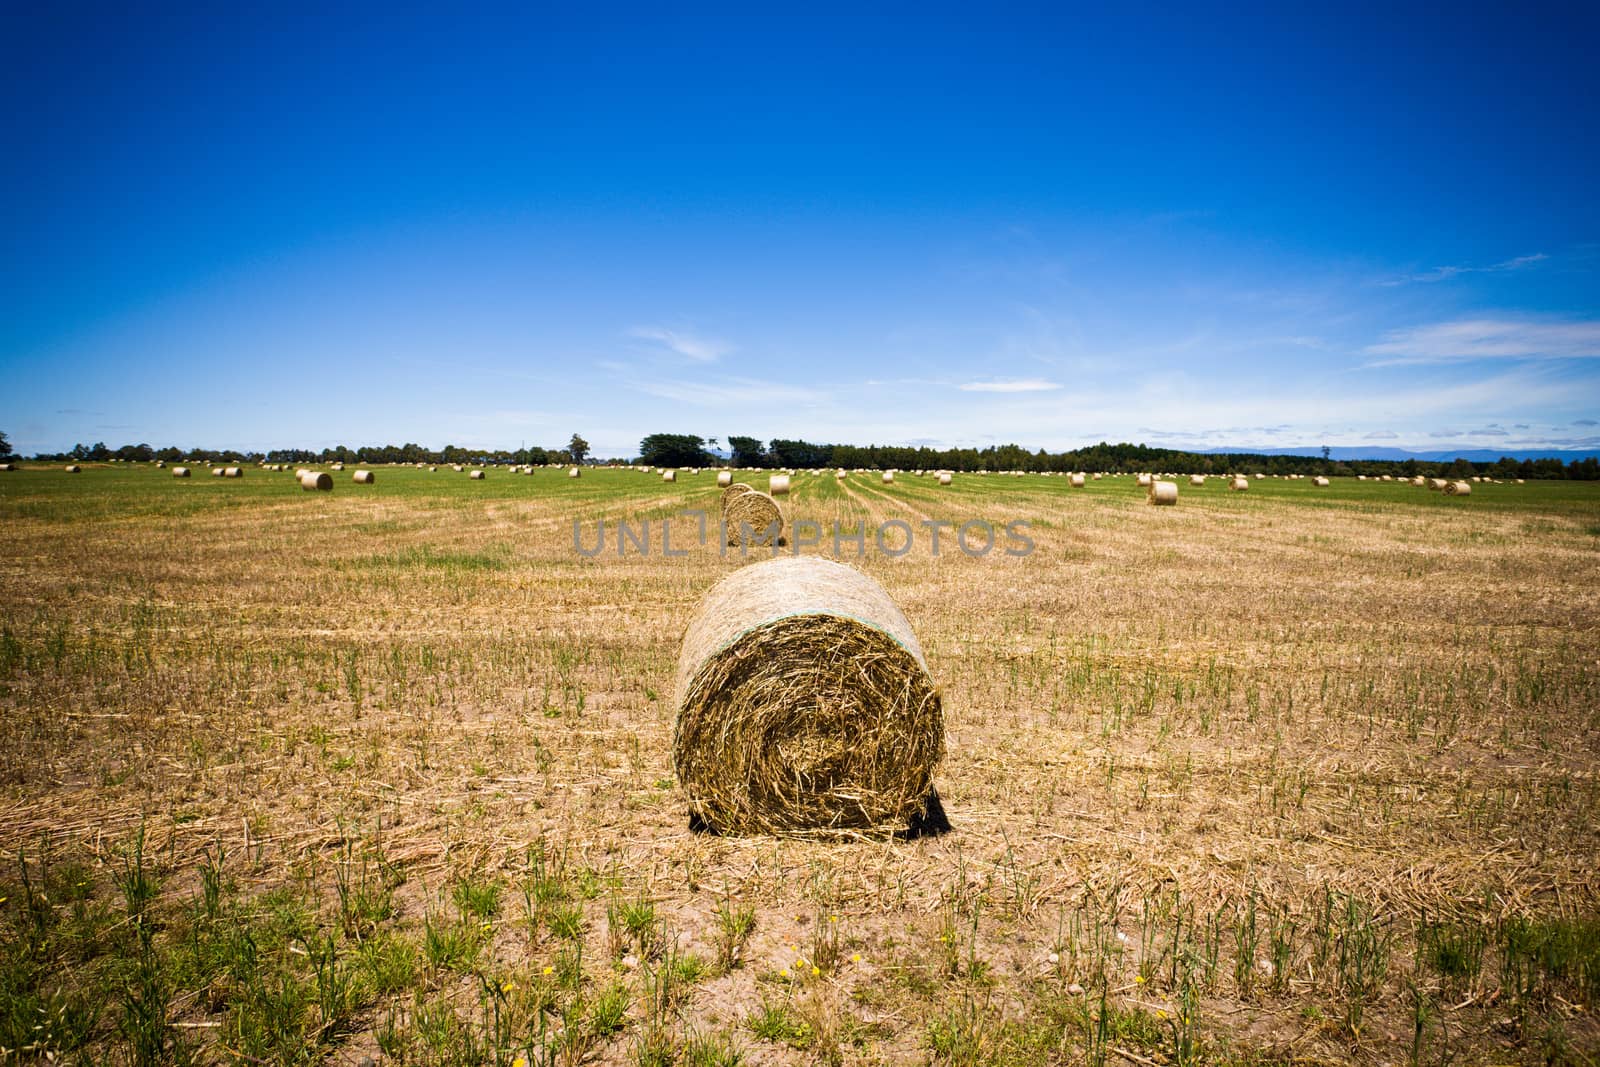 Round hay bale in a freshly cut and raked agricultural field with a flock of sheep grazing in the distance